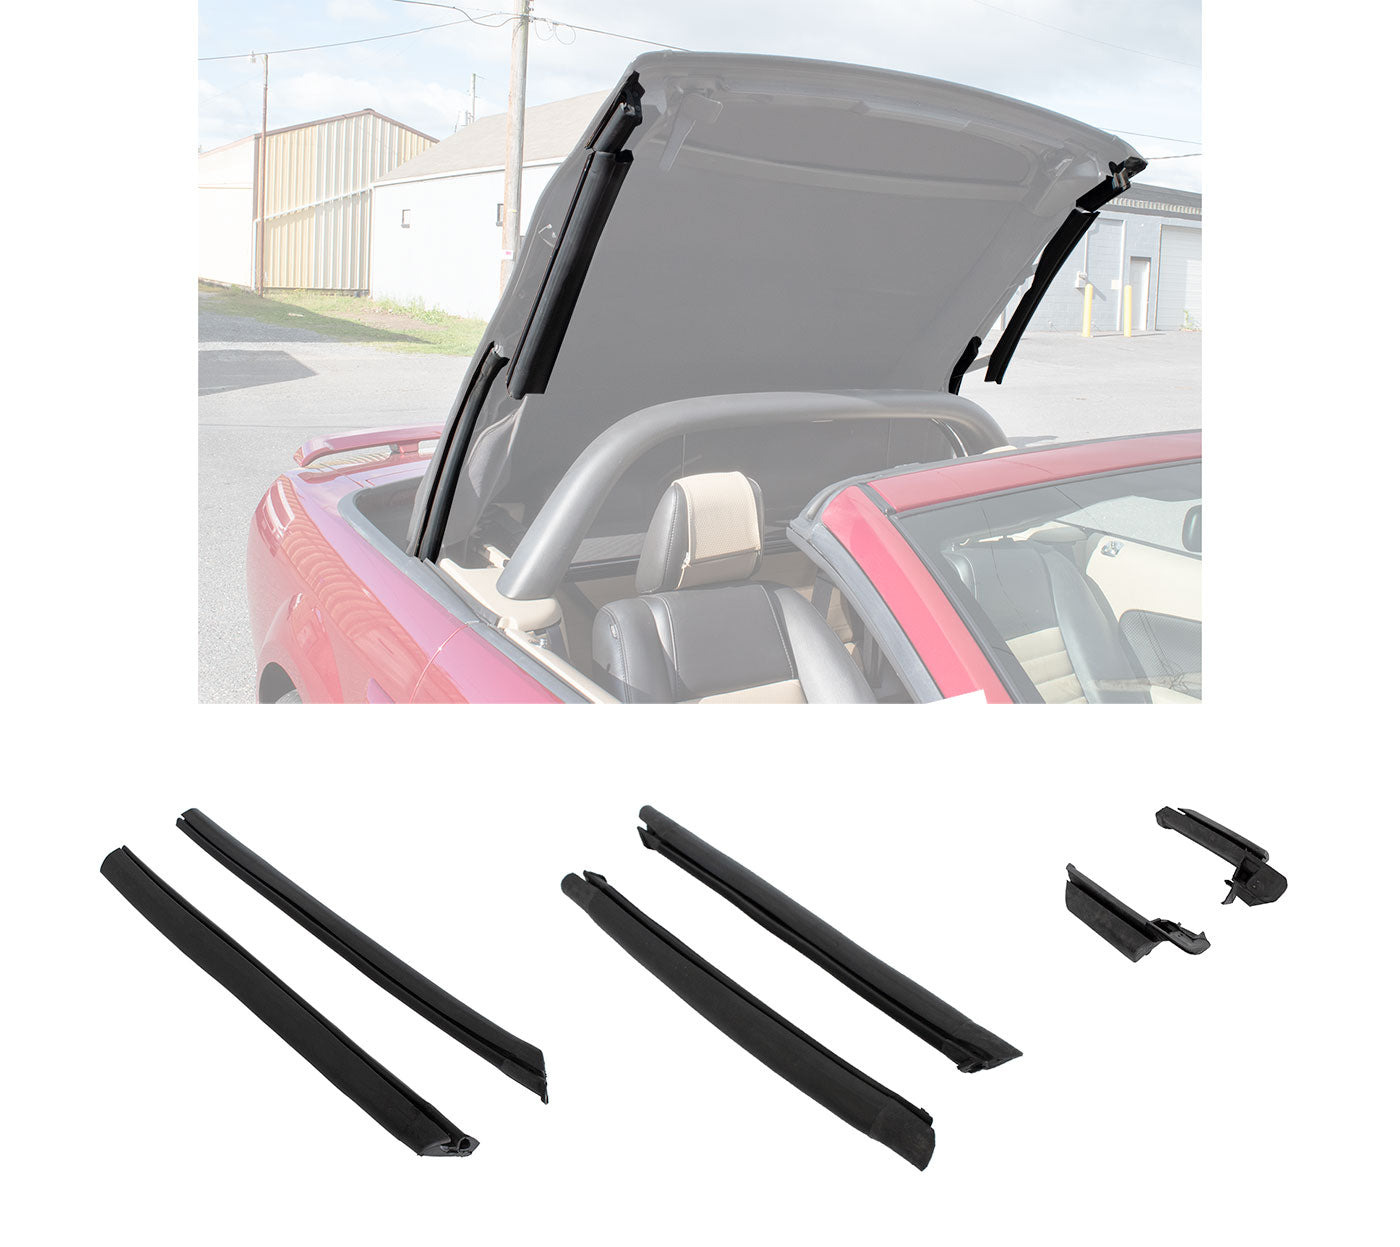 2005-2014 Mustang Convertible Top Front Center & Rear Side Rail Rubber Seals Kit